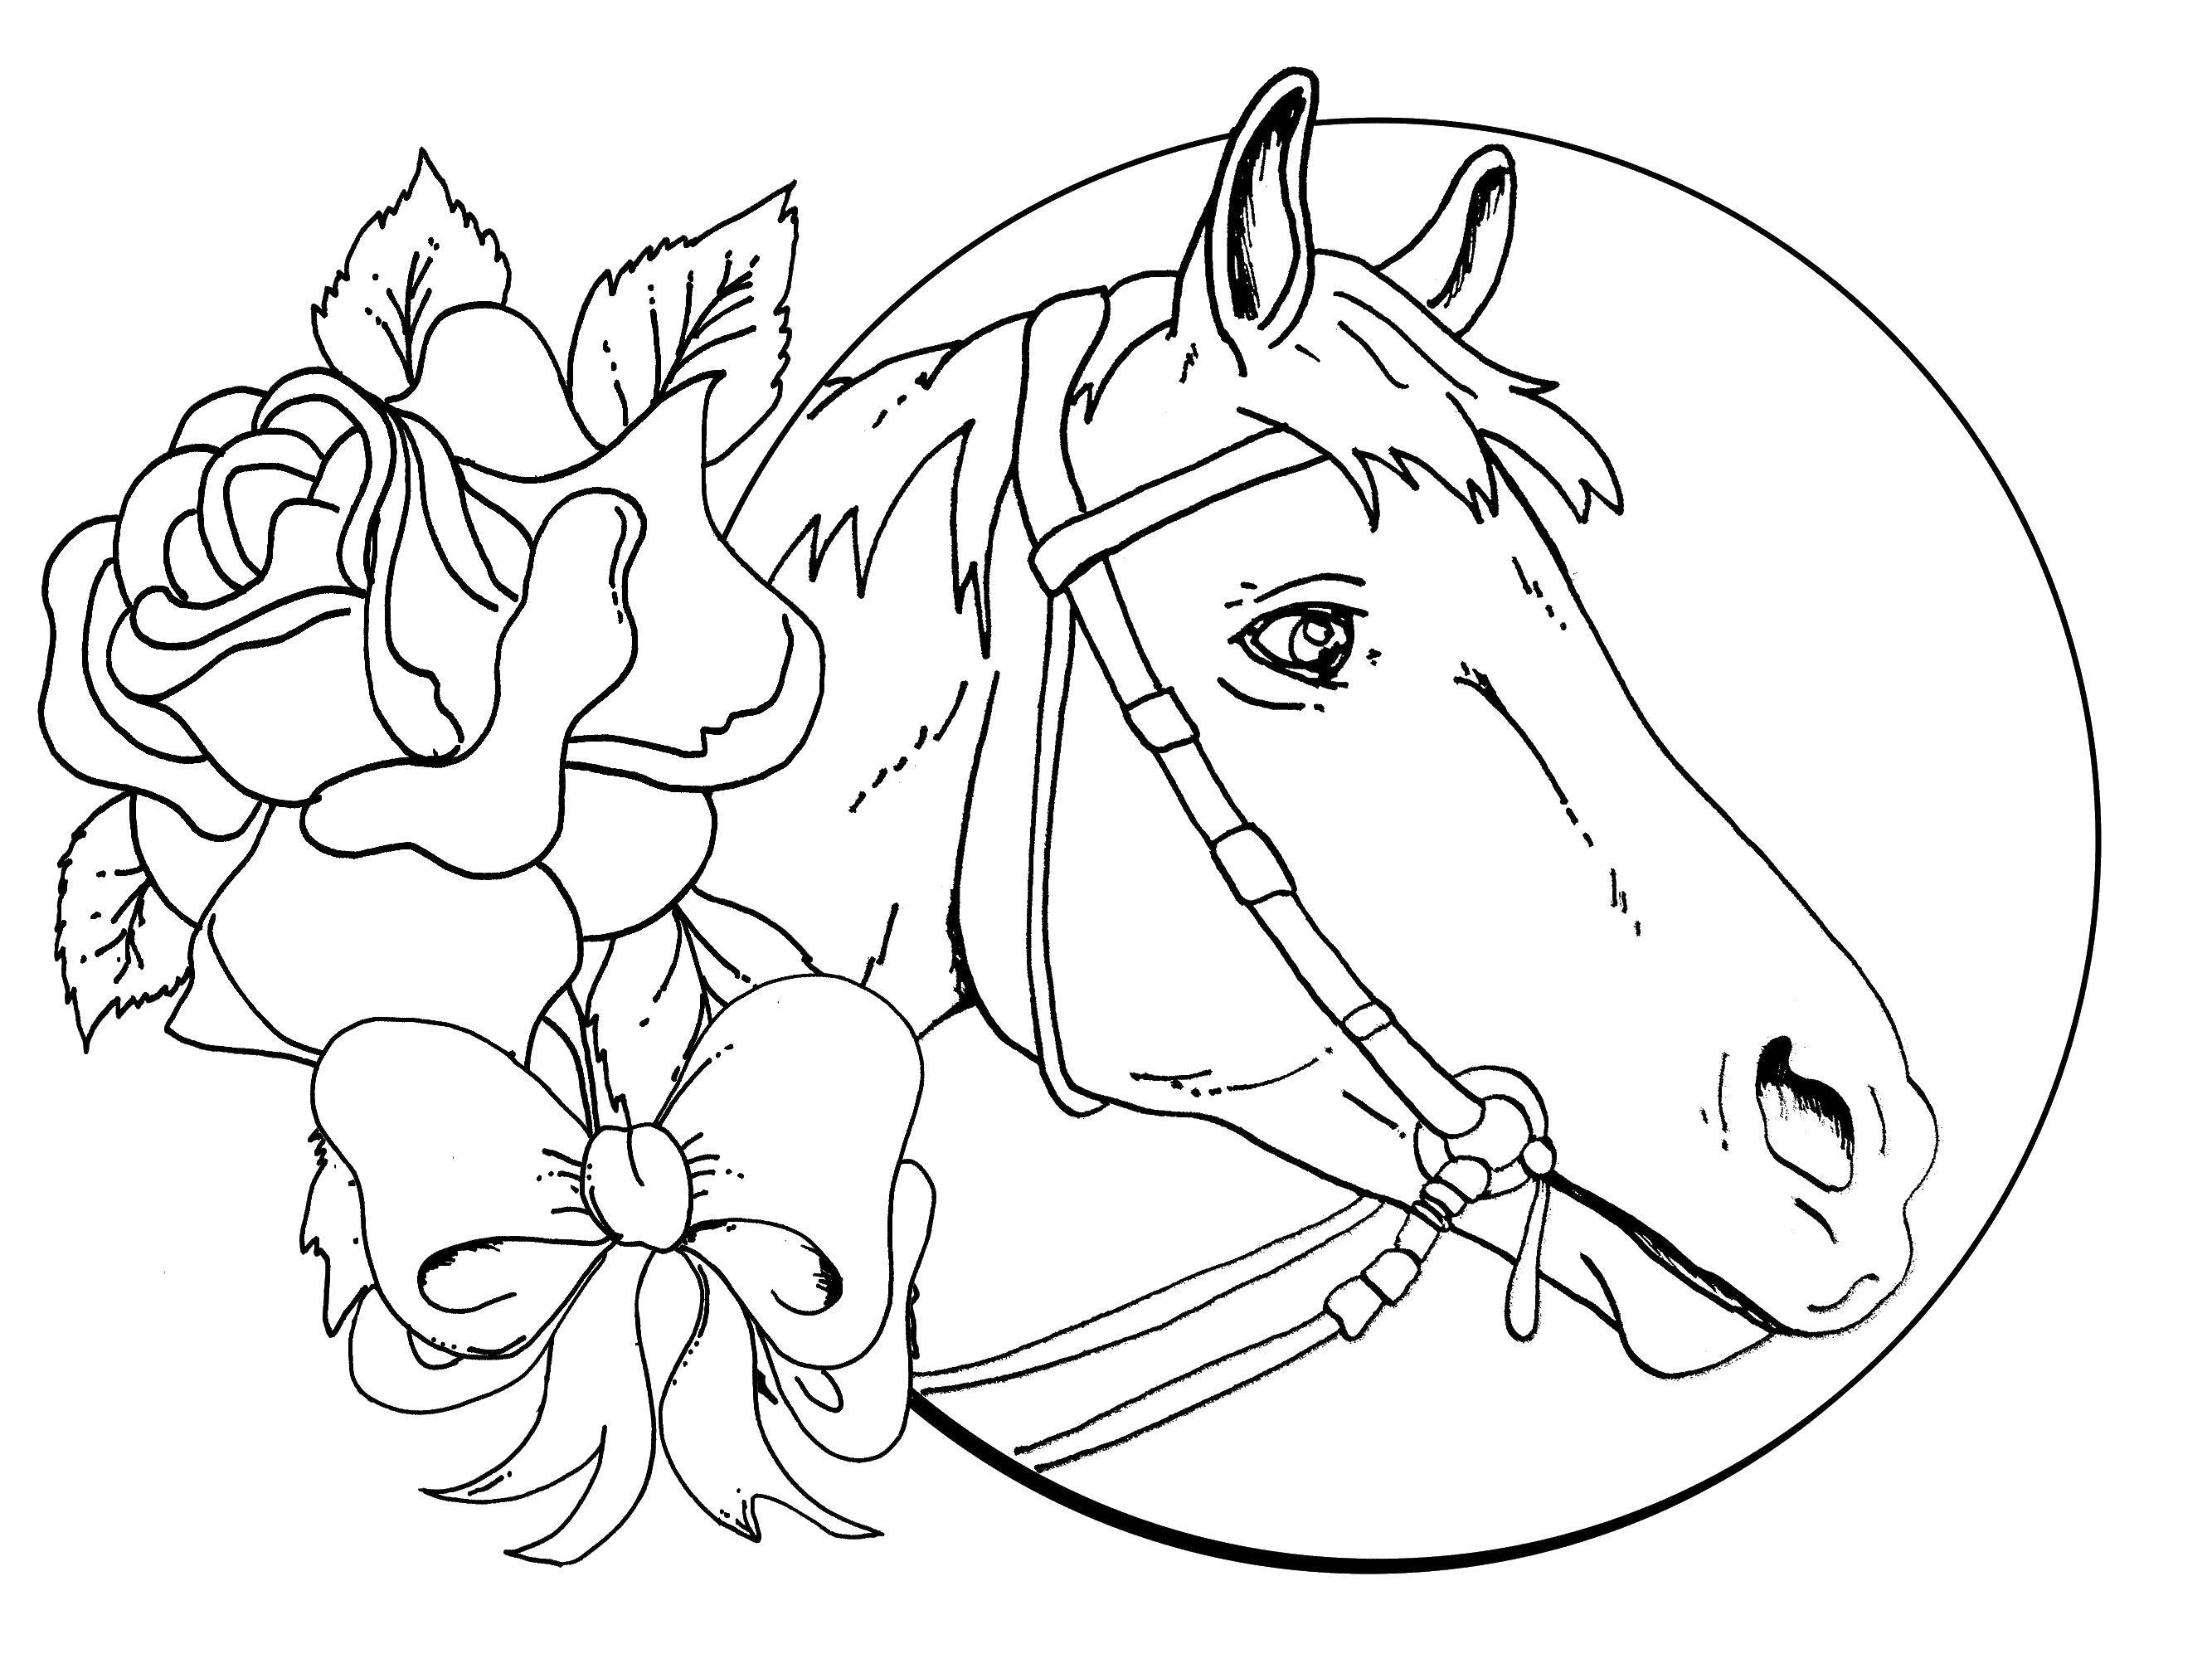 Coloring Horse and roses. Category horse. Tags:  horses, roses.